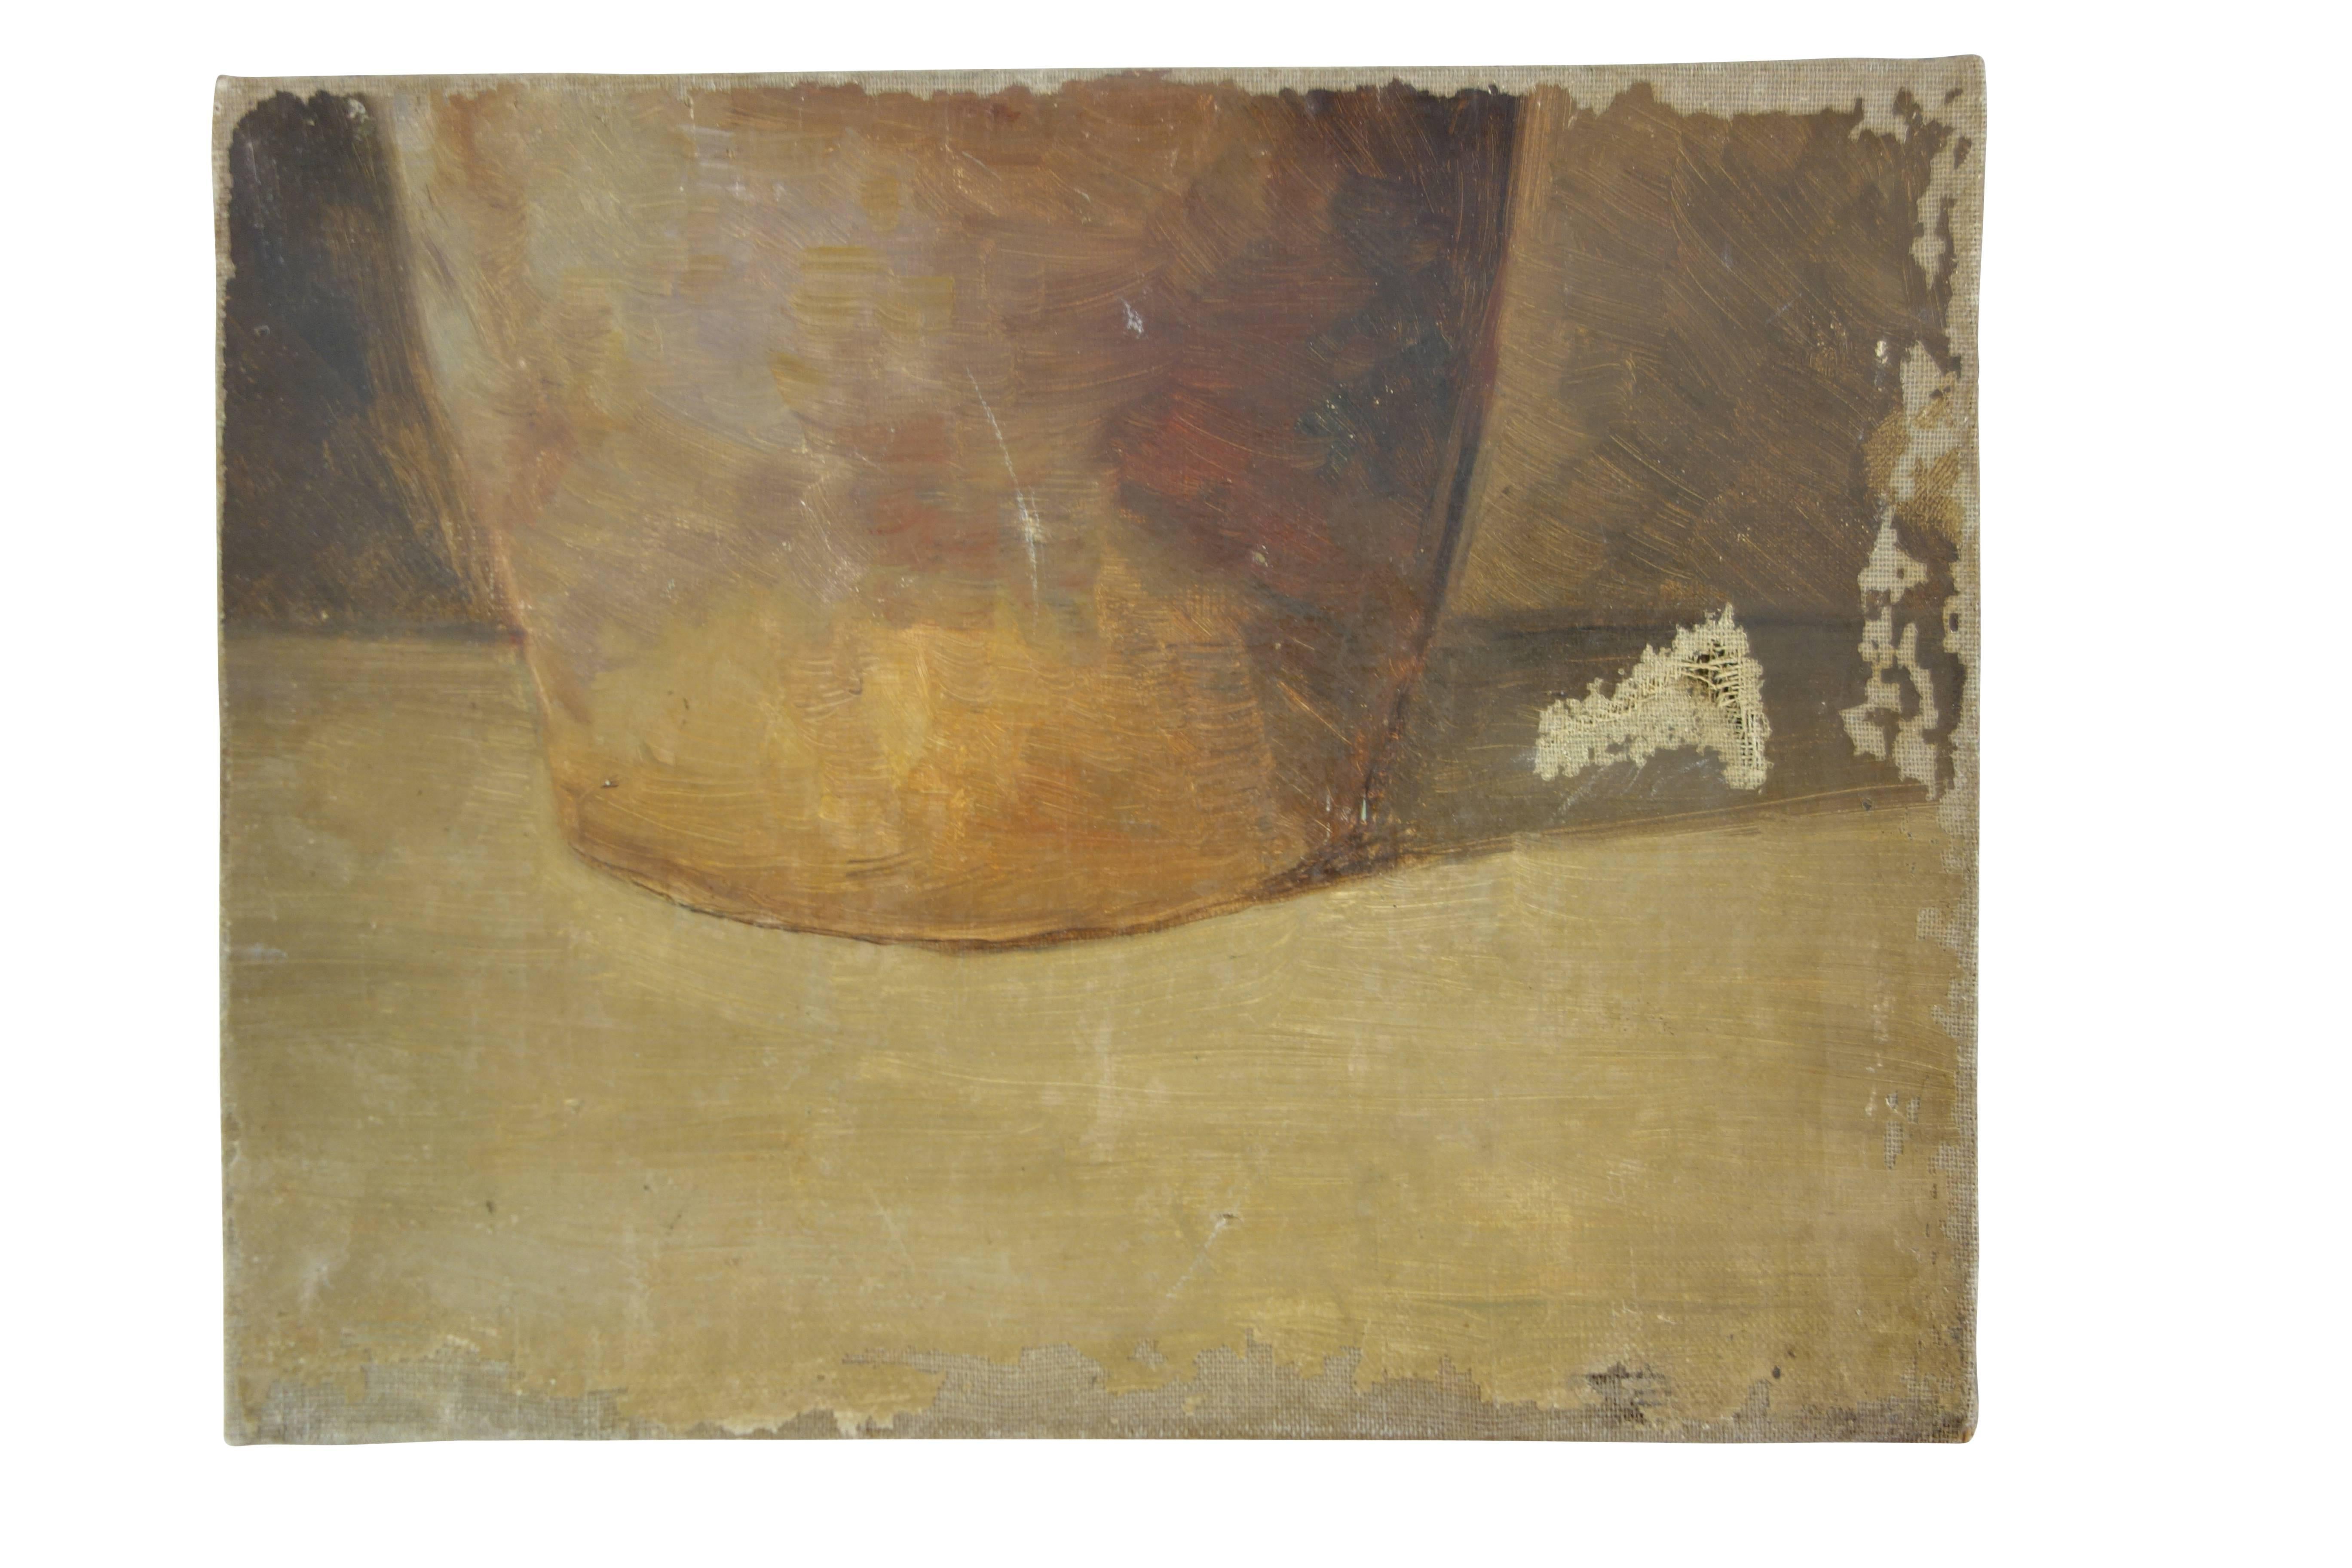 This is a small early 20th century oil on canvas still life of the bottom half of a jug from France.